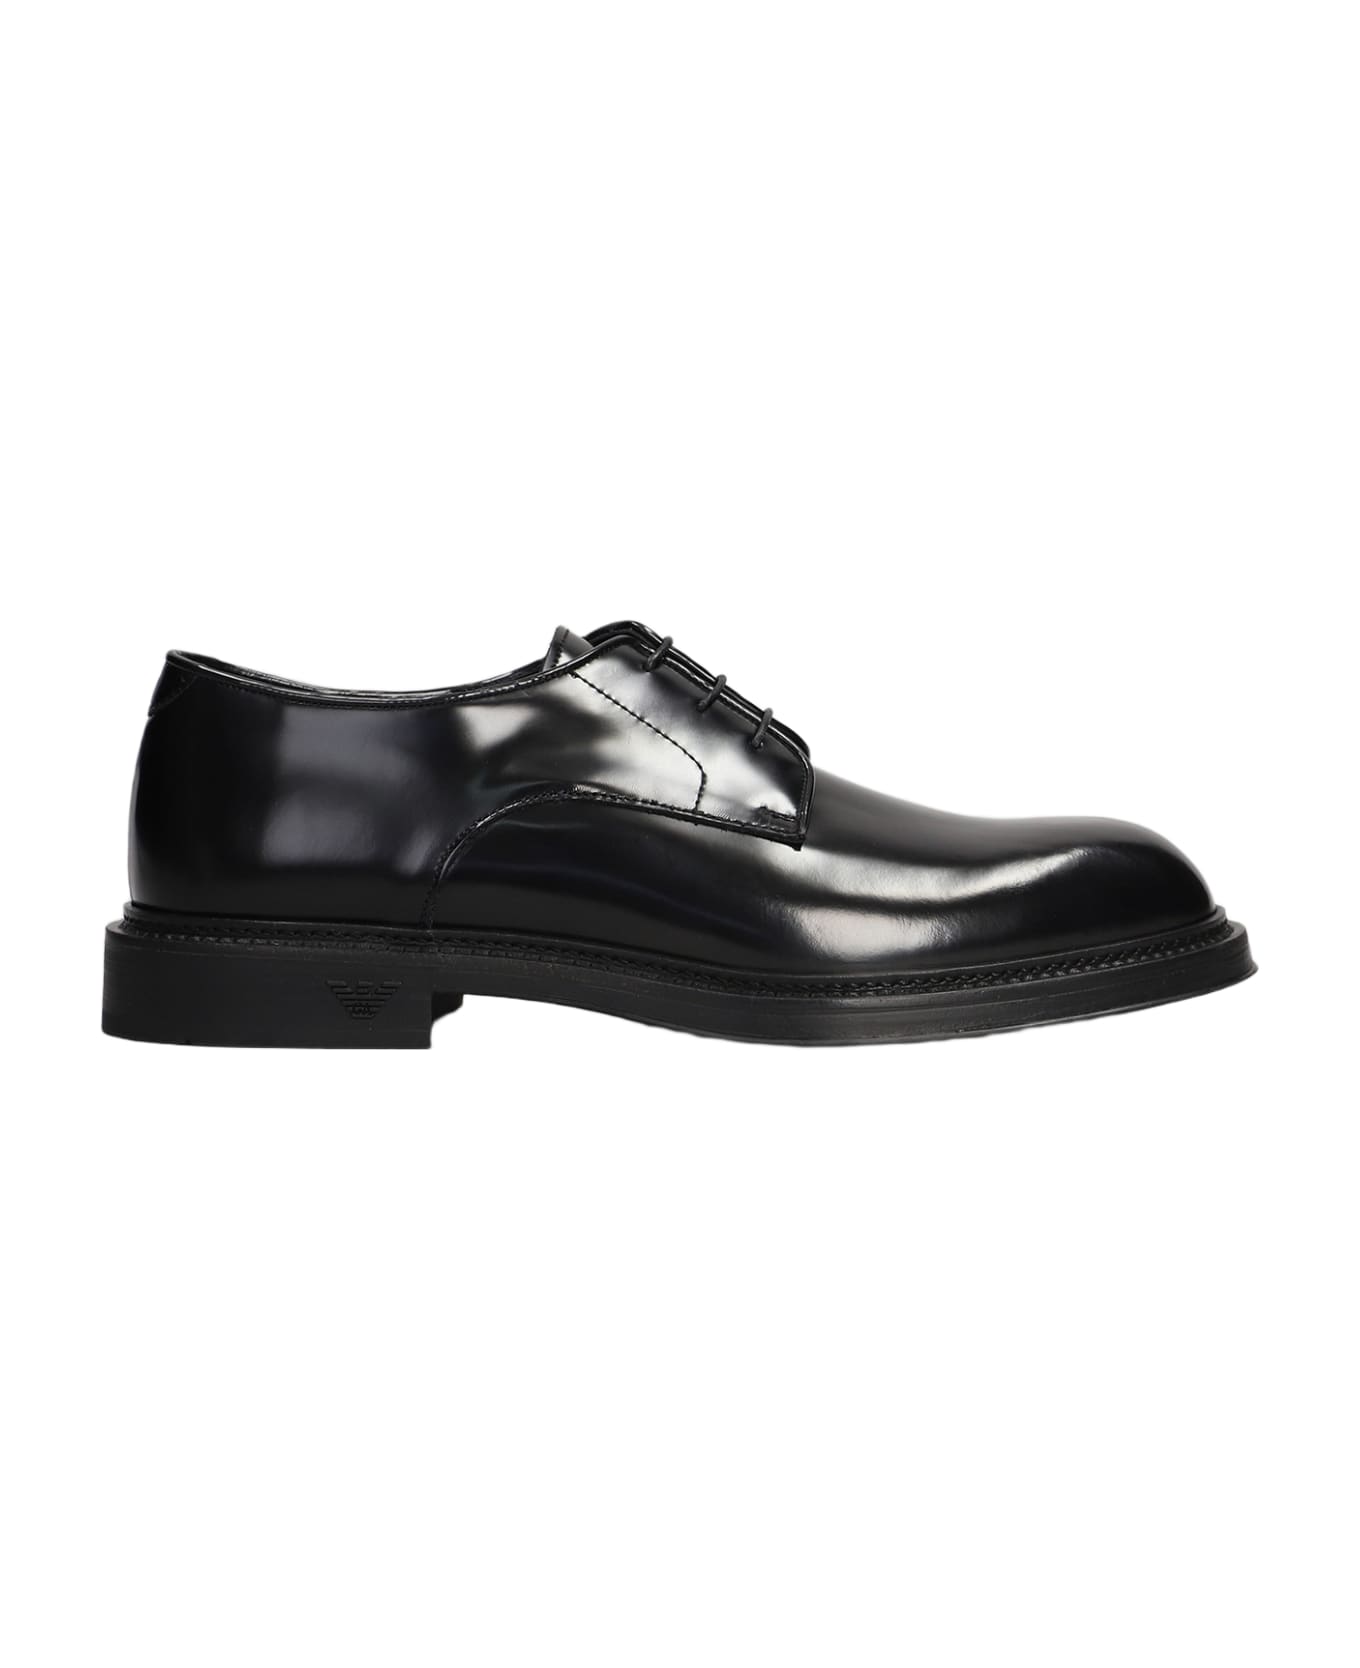 Emporio Armani Lace Up Shoes In Black Leather - black ローファー＆デッキシューズ